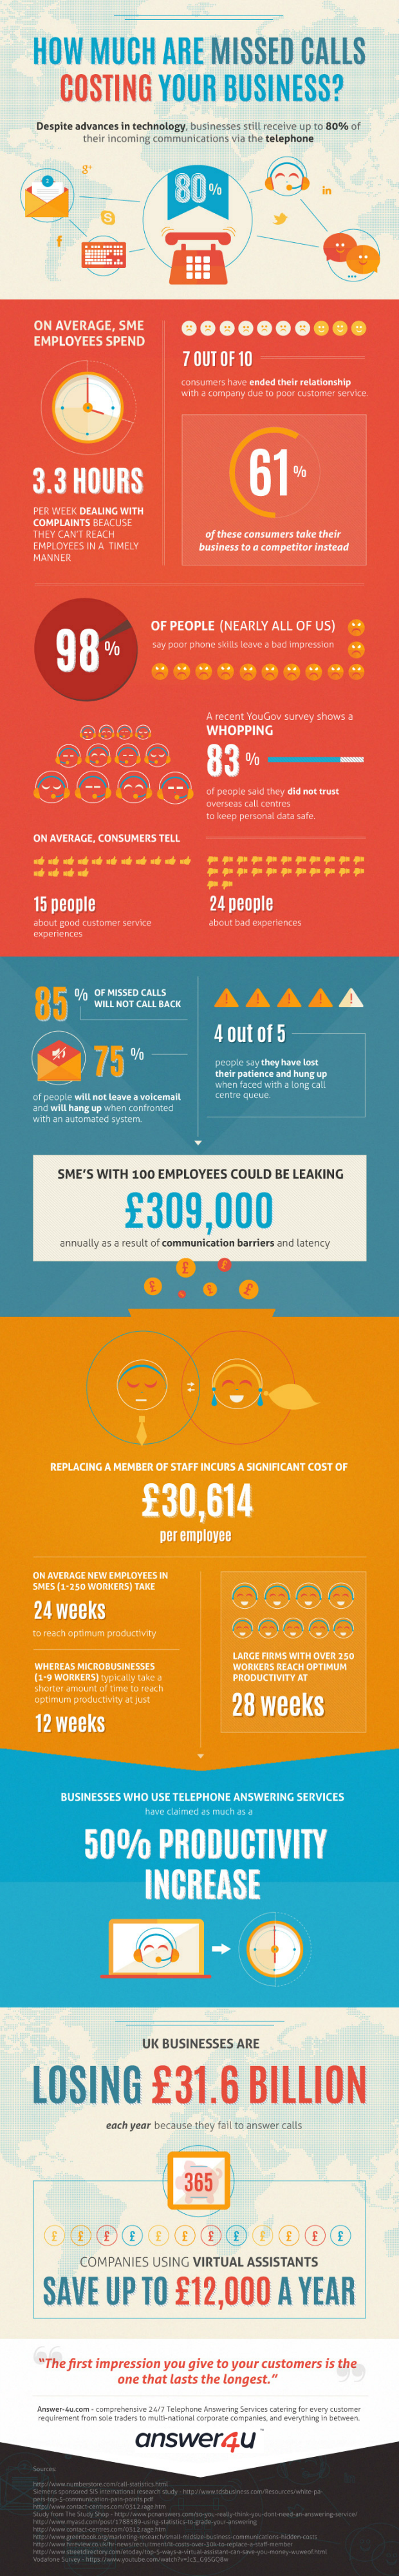 How Much are Missed Telephone Calls Costing your Business?